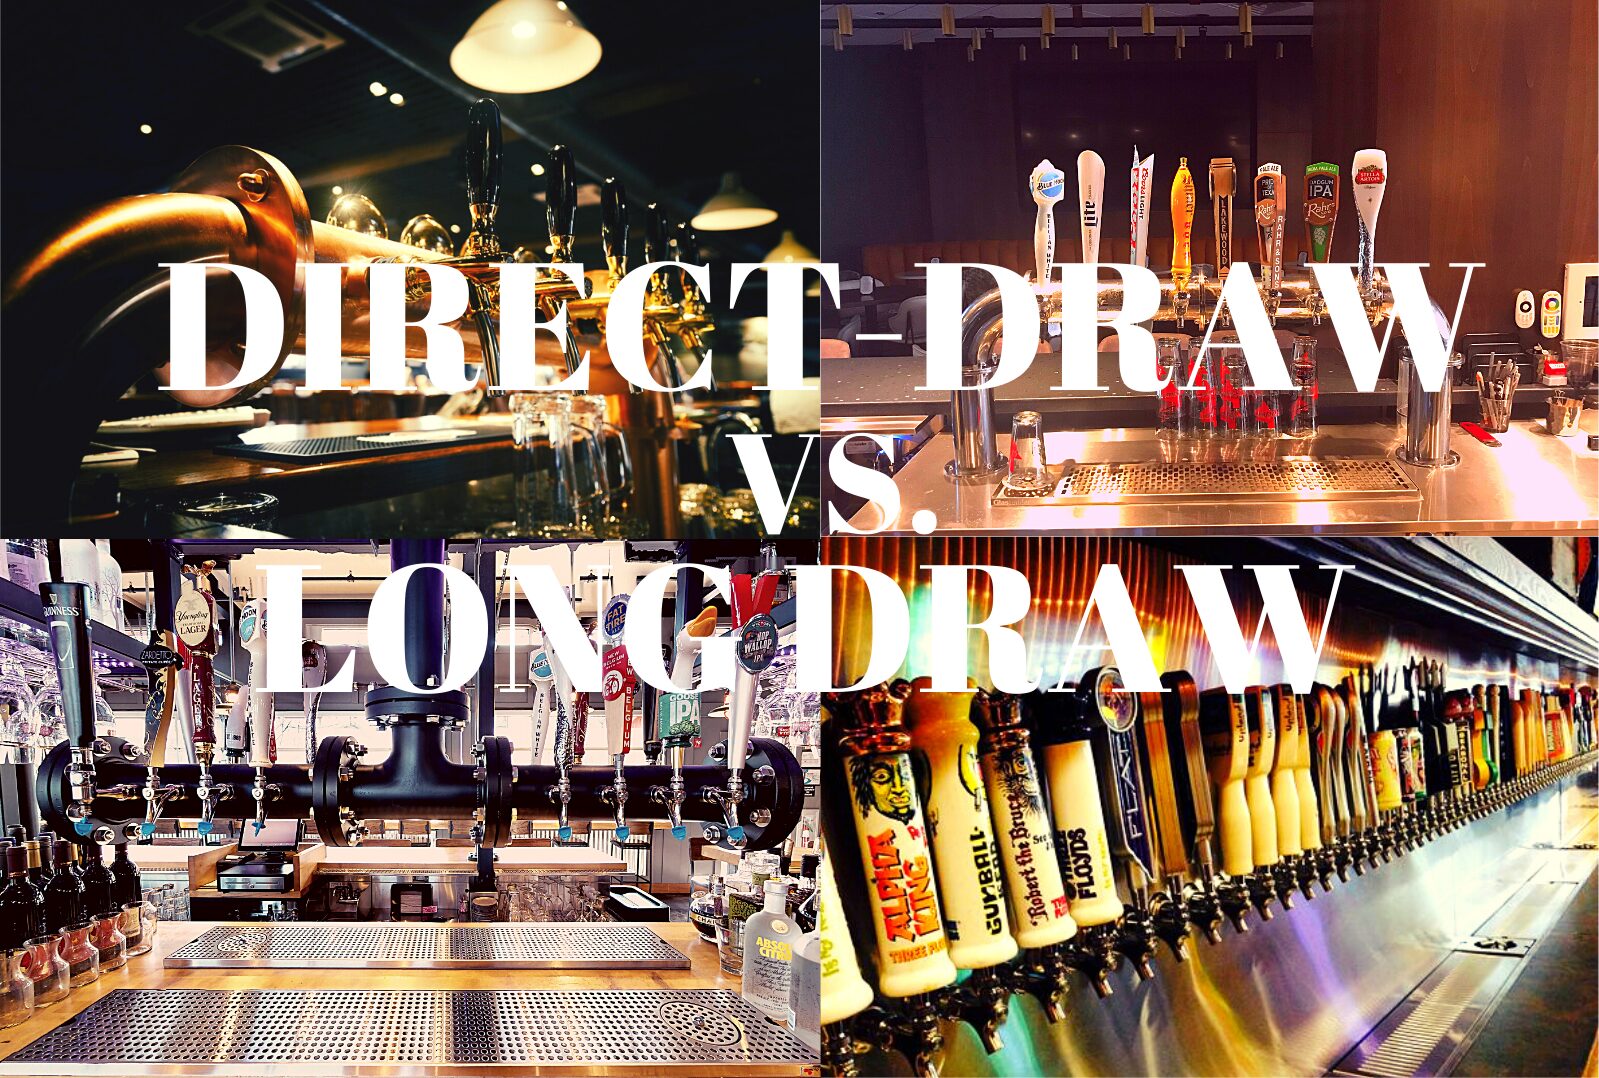 How Much Do Draft Beer Systems Cost?